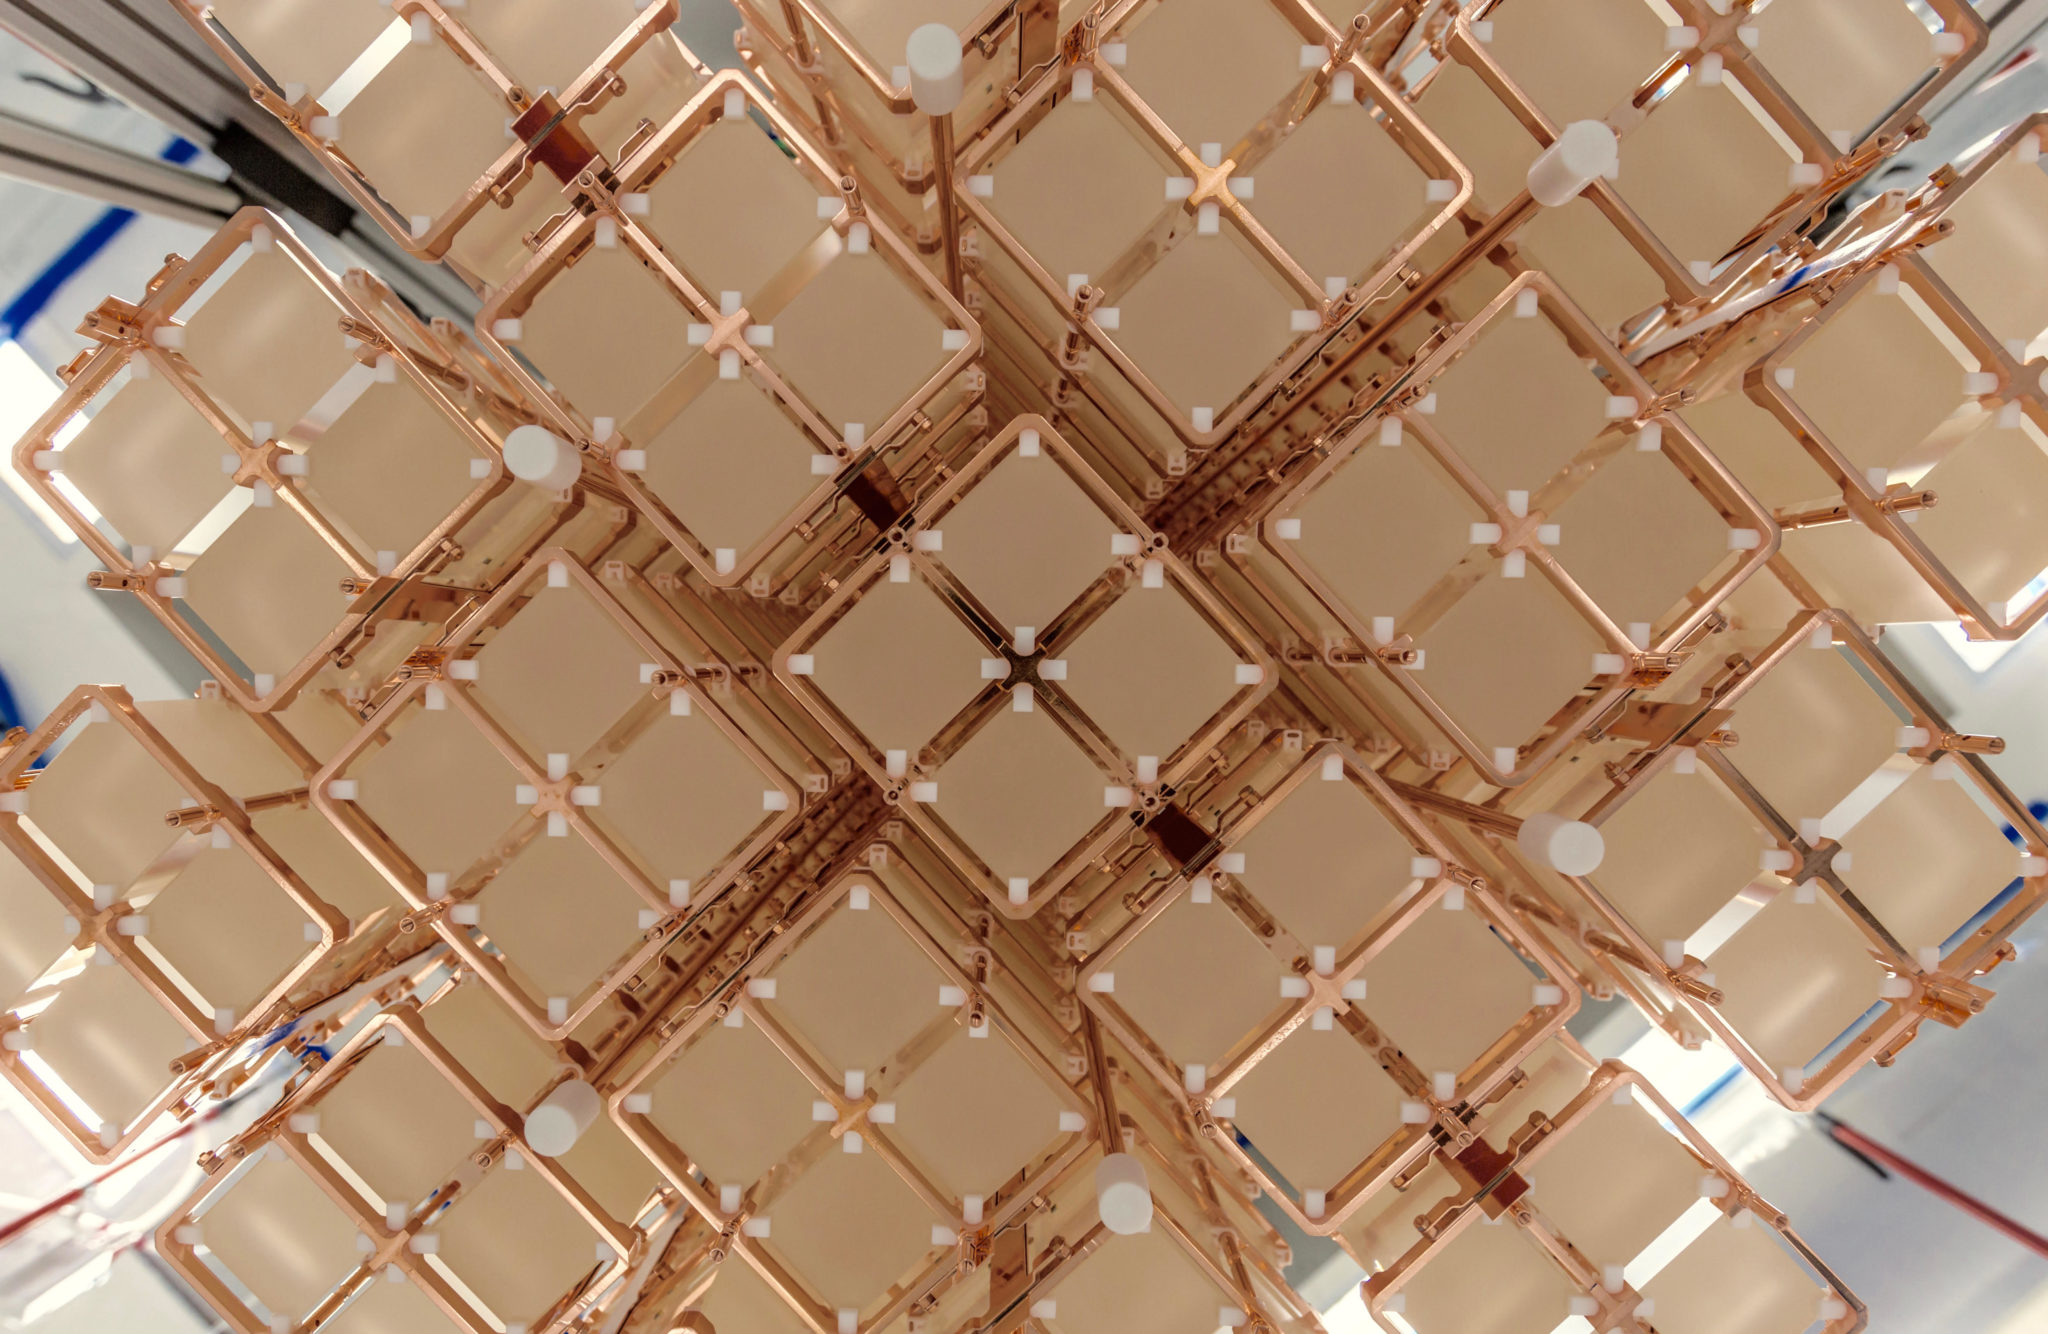 The CUORE detector array during the experiment's assembly